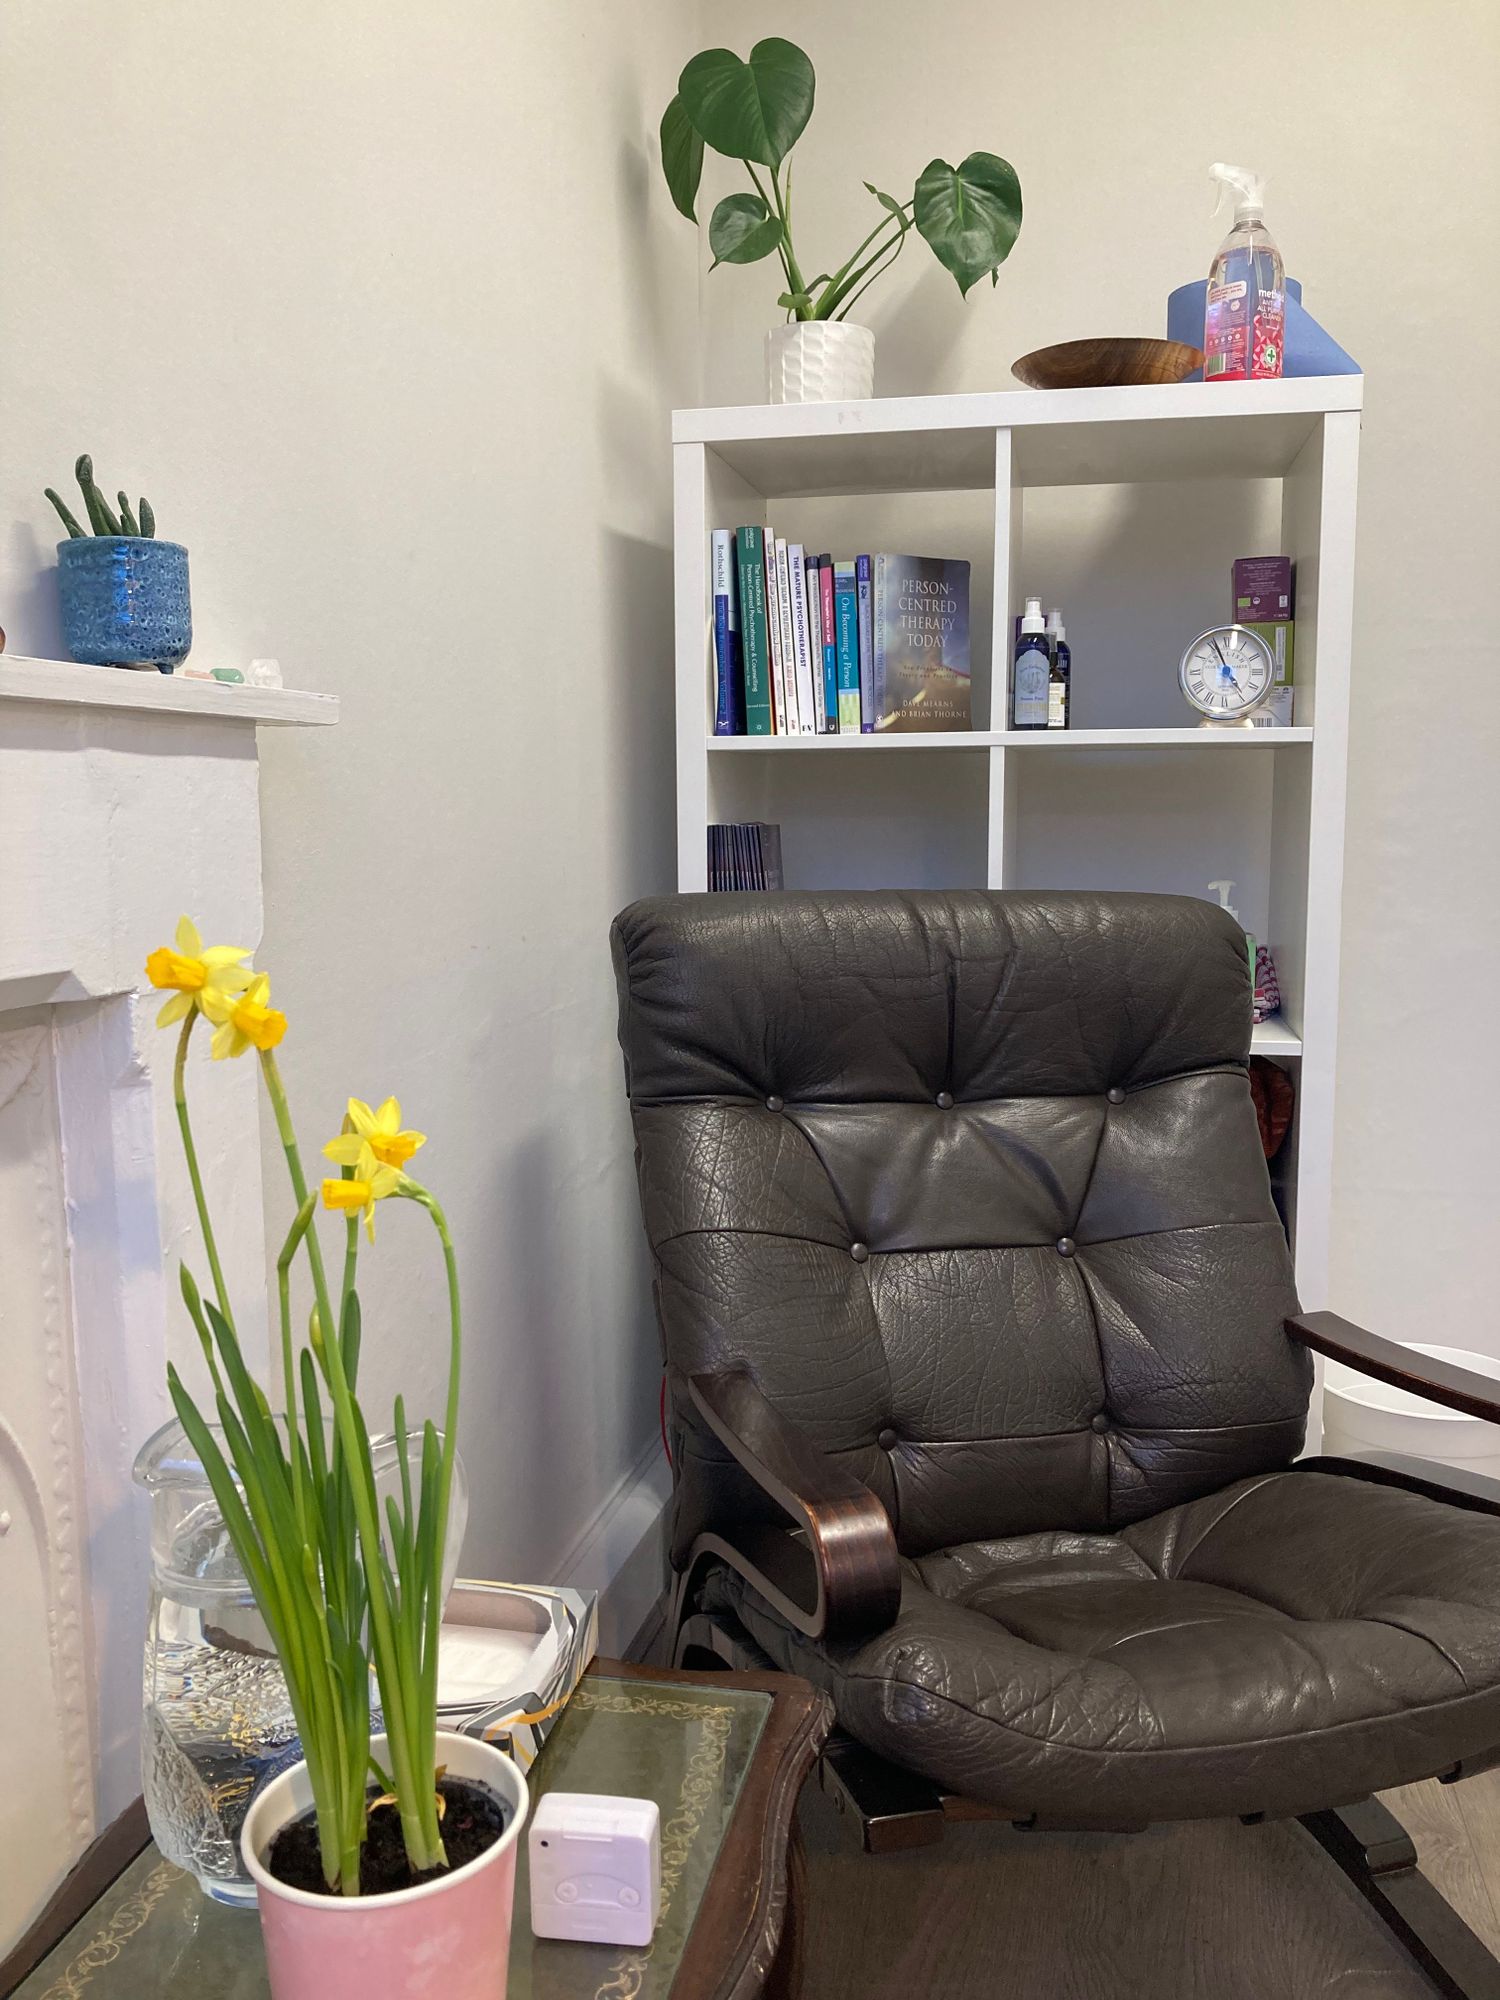 Gallery Photo of My dedicated counselling space